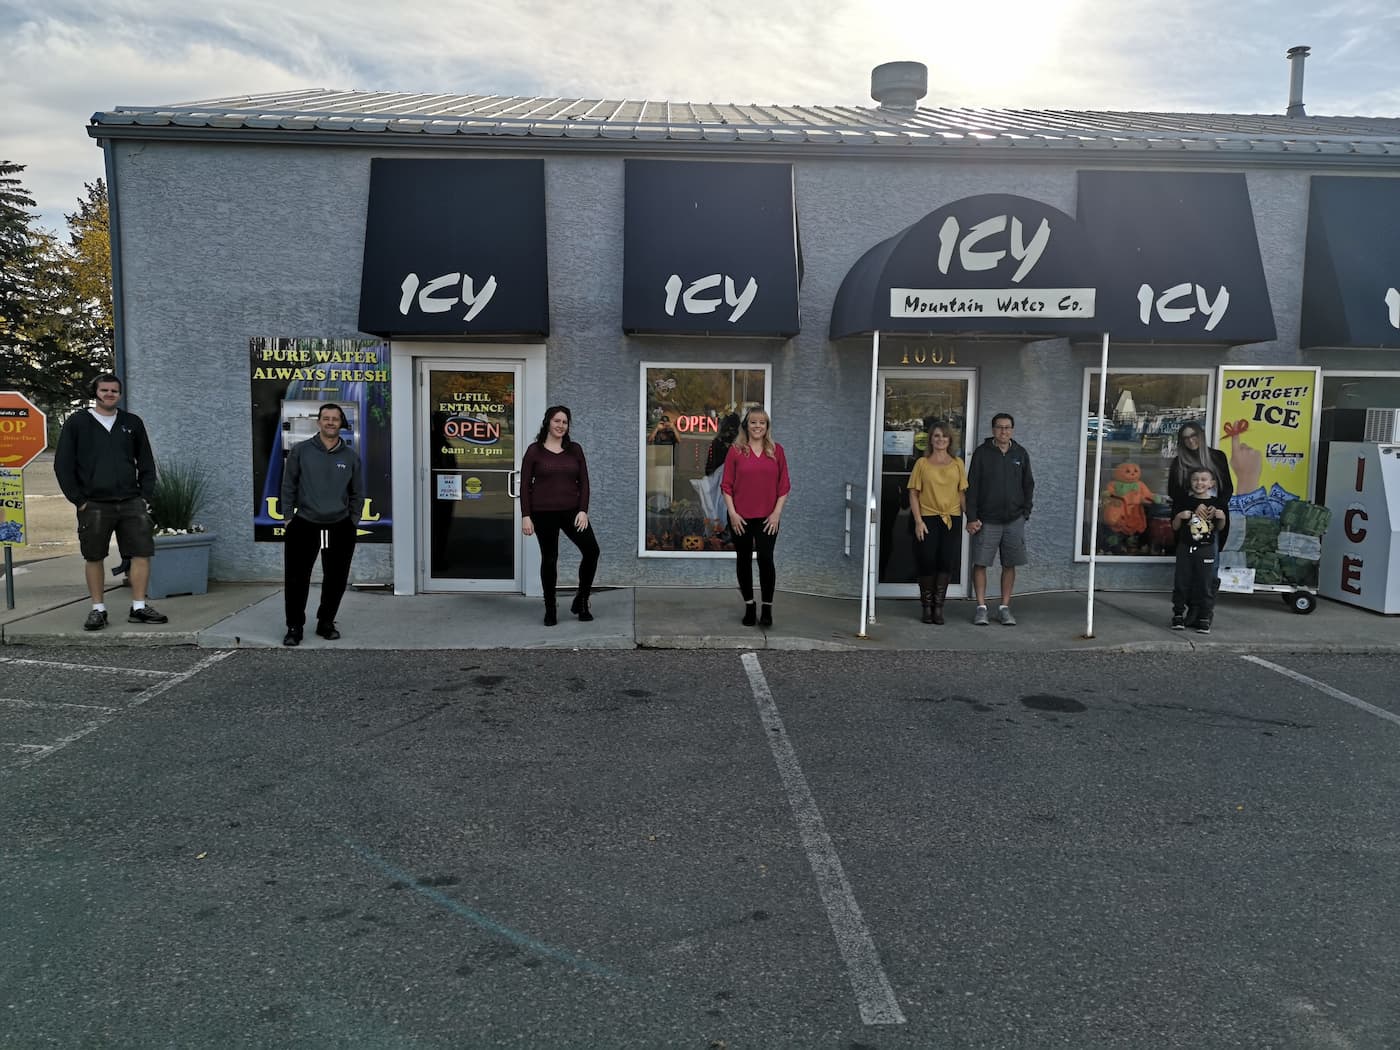 People standing outside Icy Mountain Water storefront